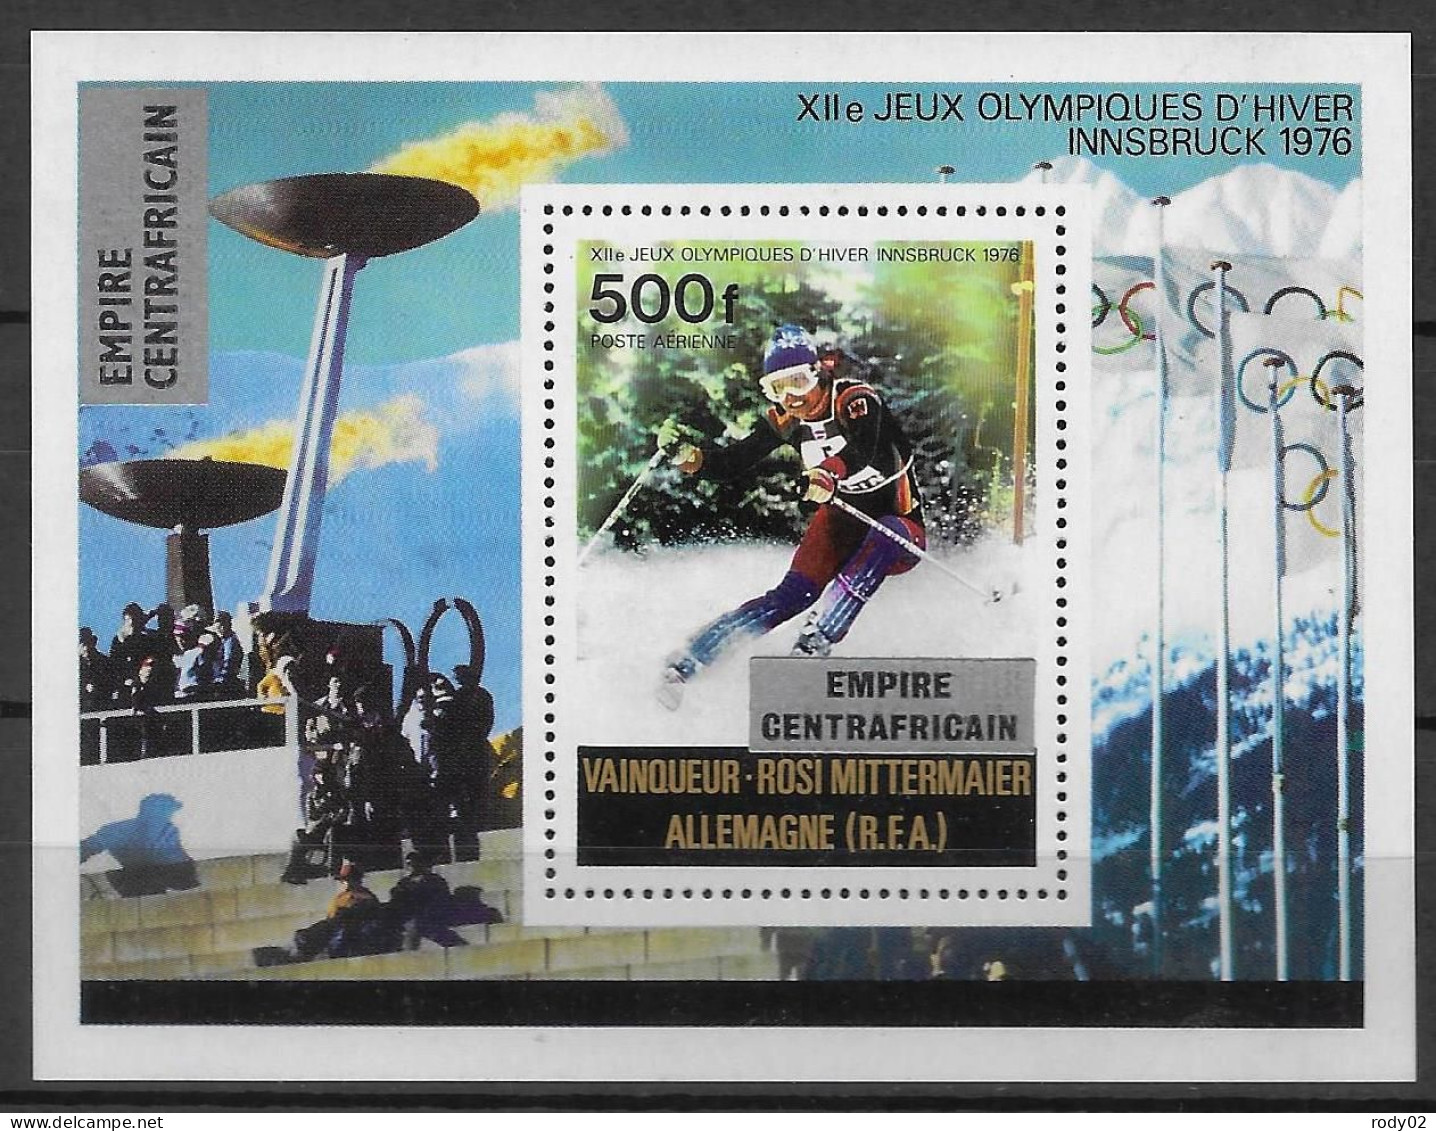 CENTRAFRIQUE - JEUX OLYMPIQUES D'HIVER A INNSBRUCK  - N° 297 ET 298, PA 175 A 177 ET BF 17 - NEUF** MNH - Hiver 1976: Innsbruck